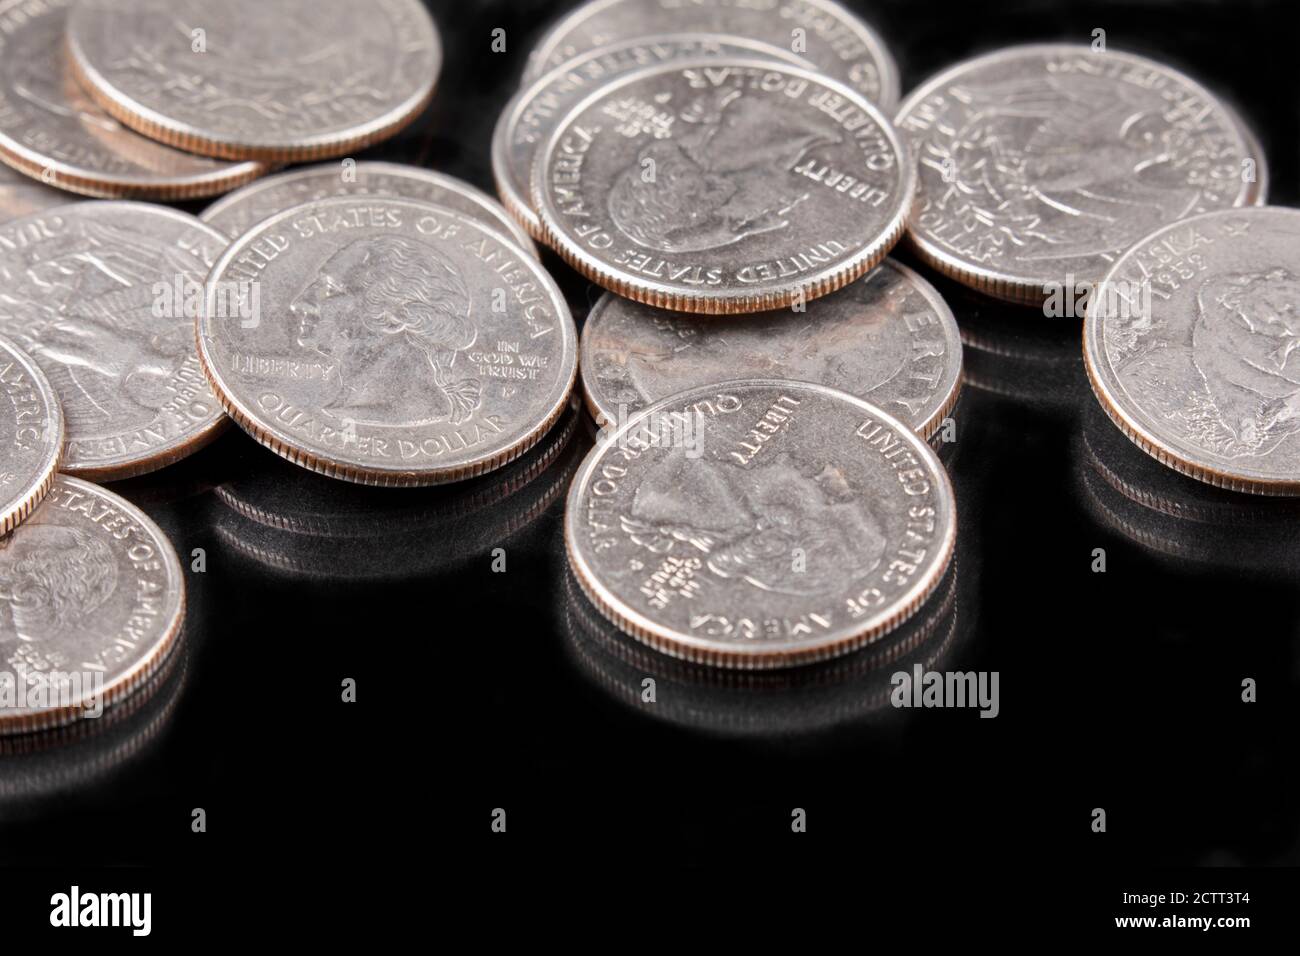 A Background of United States Quarters Coins on black background Stock Photo